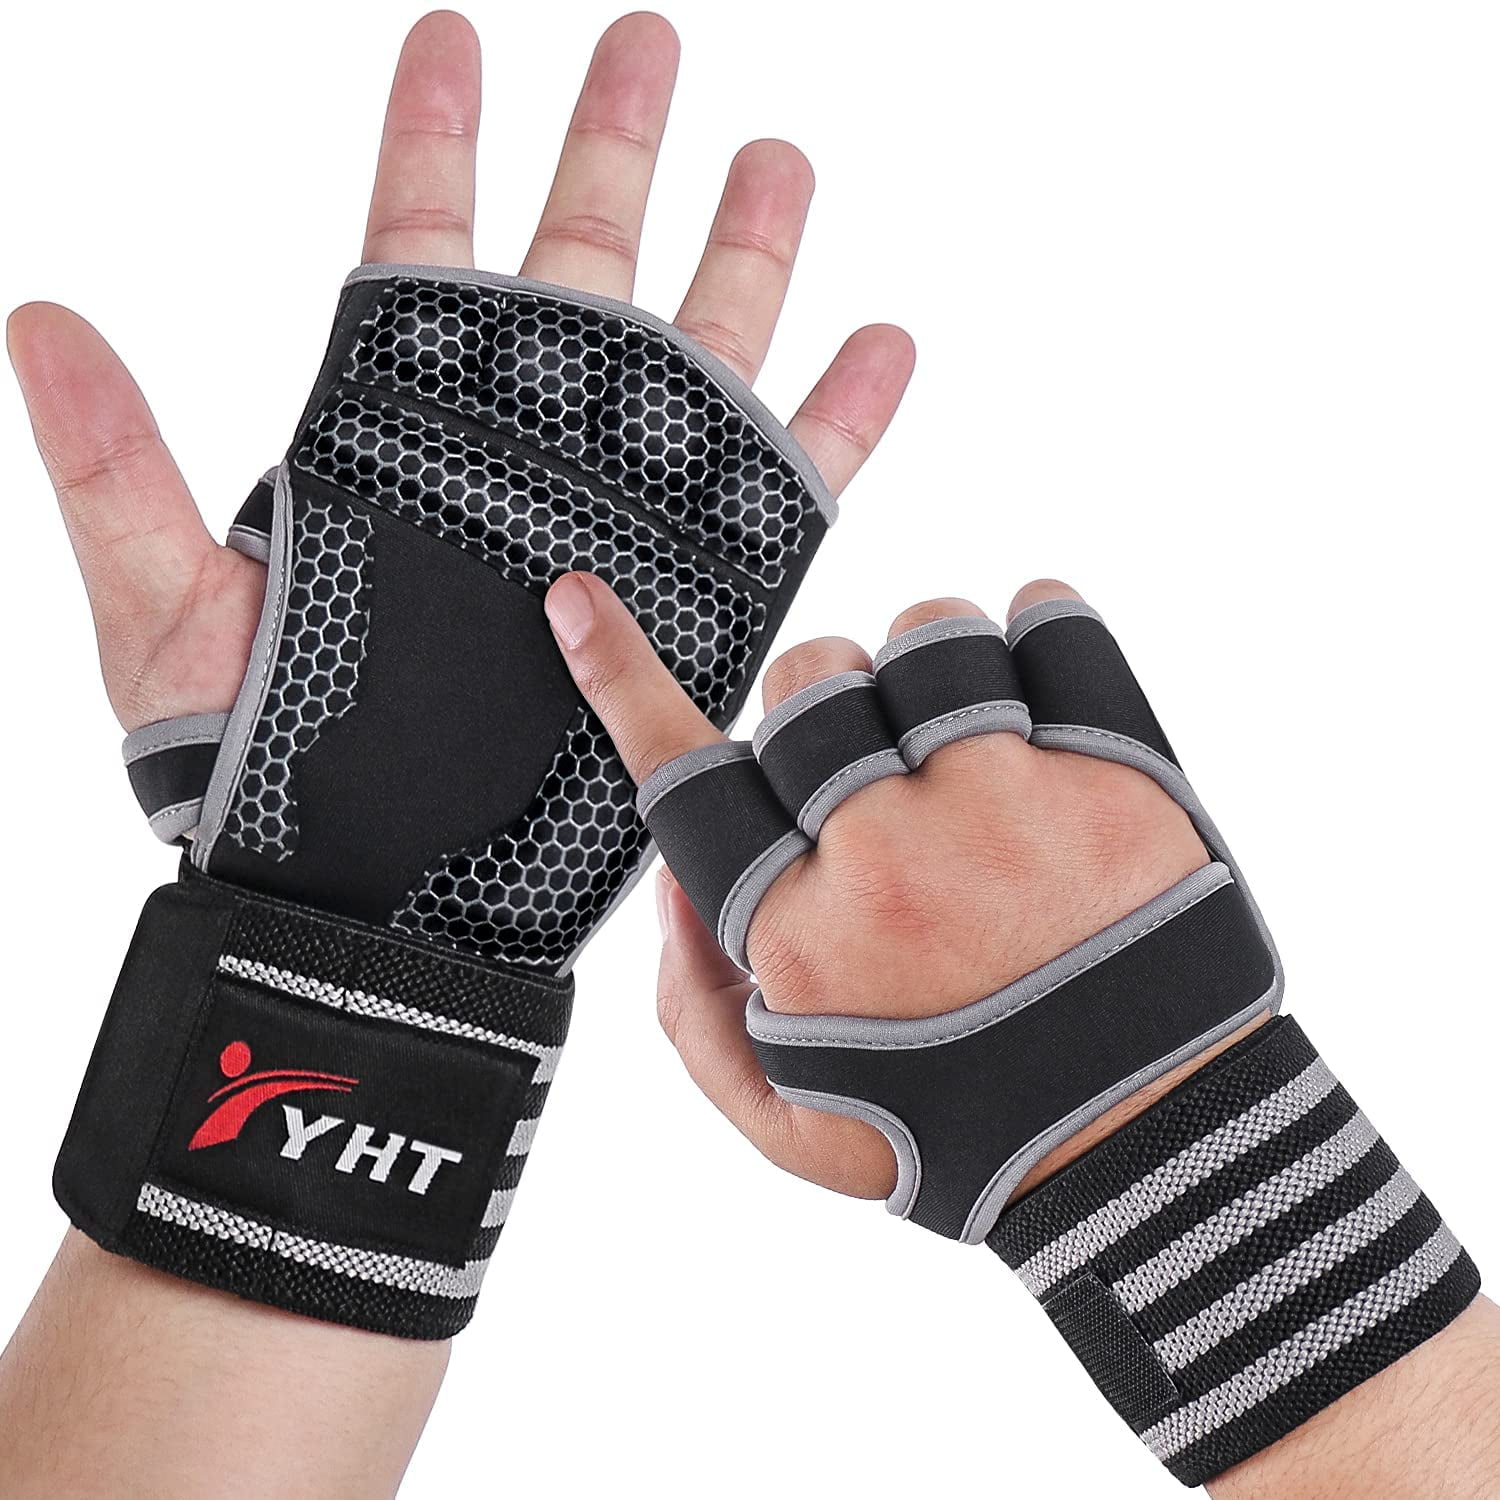 Men&Women Fitness Gloves Wrist Wraps Gym Training Weight Lifting Sports Exercise 